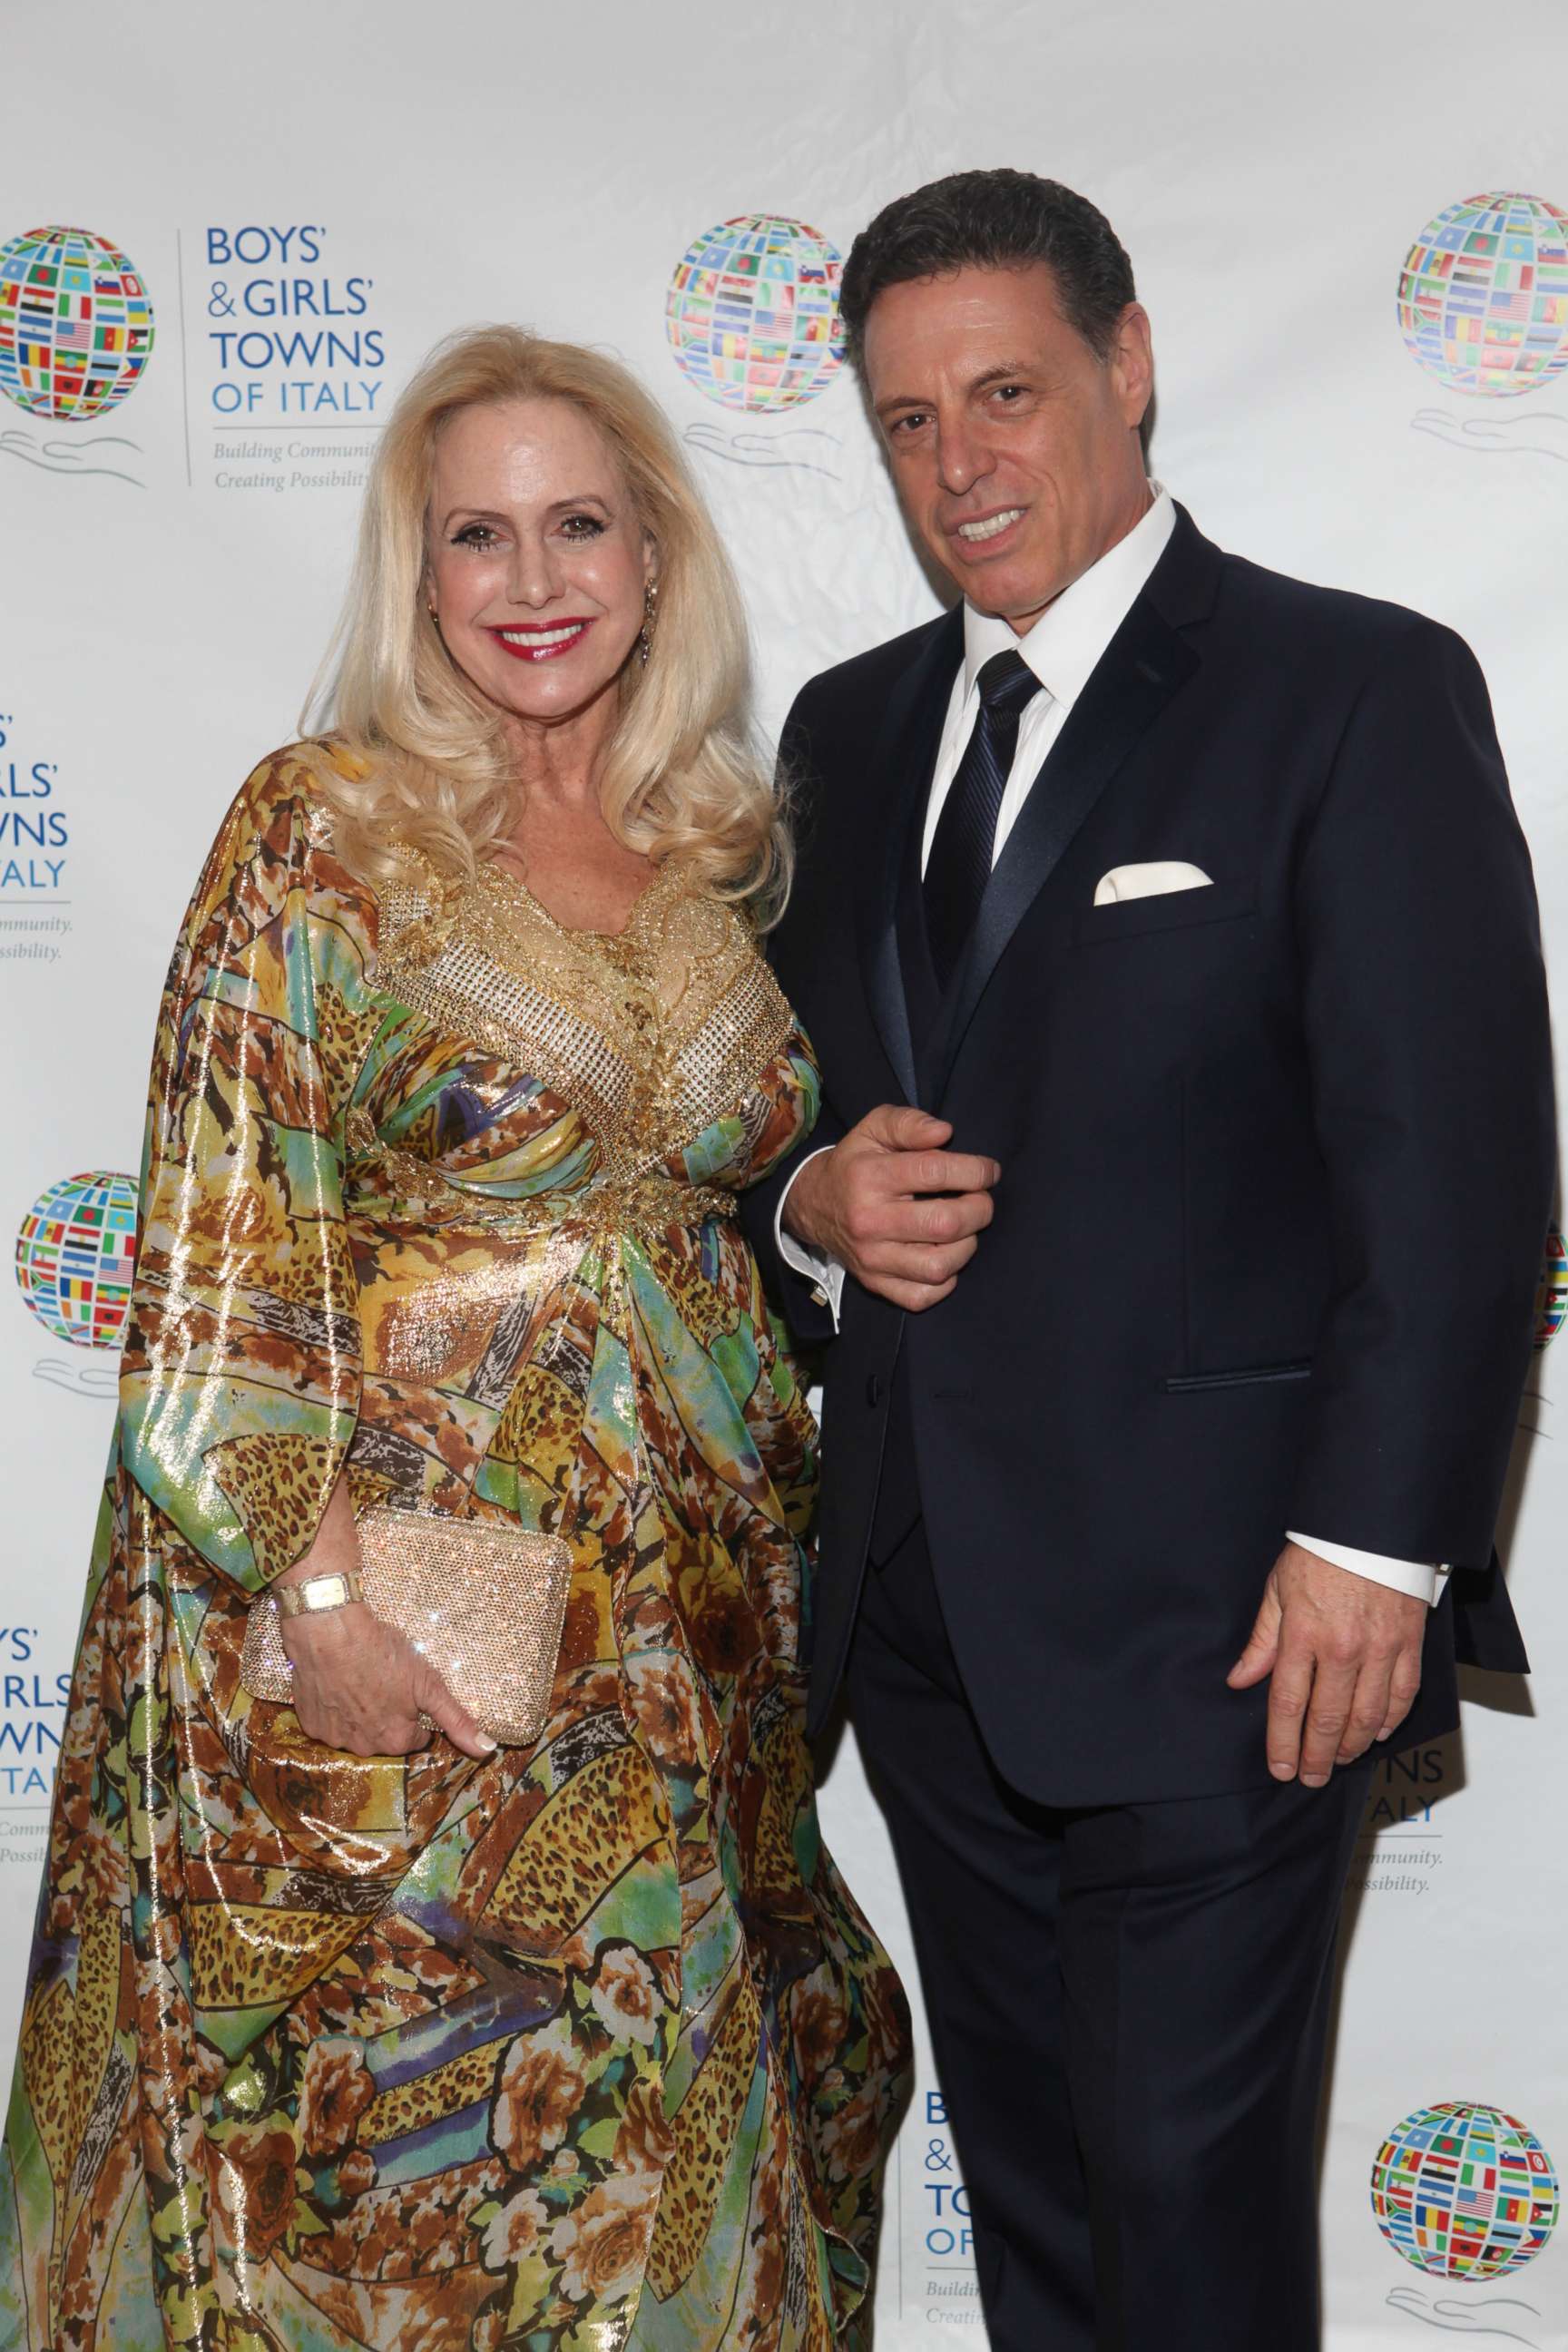 PHOTO: Charles S. Gucciardo attends an event at The Pierre Hotel on April 5, 2016, in New York City, with Karen King.